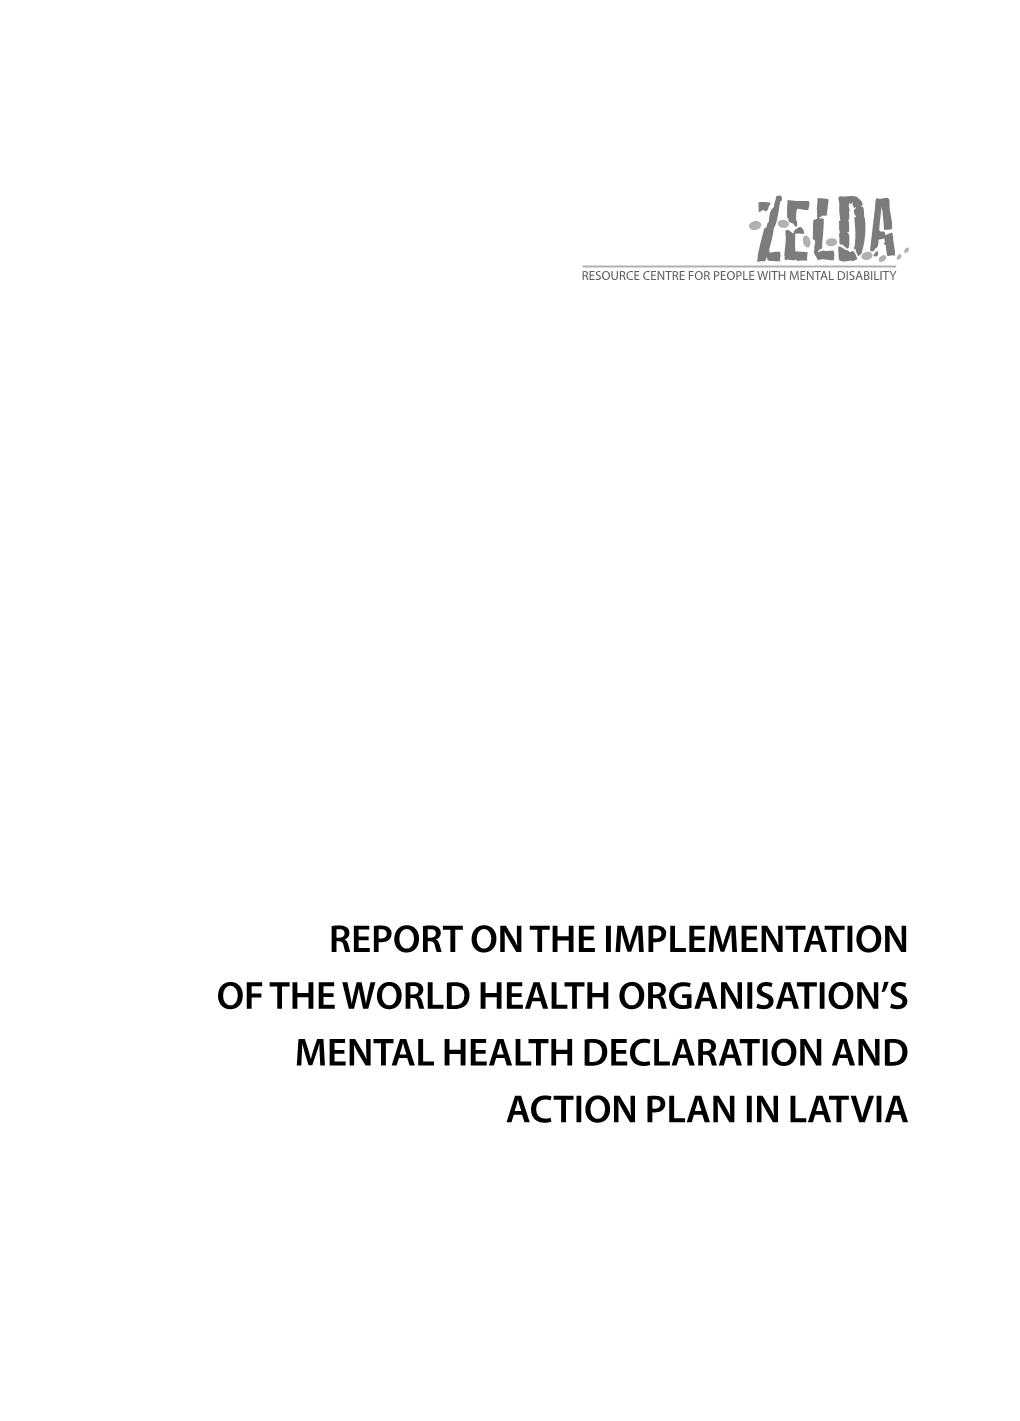 Report on the Implementation of the World Health Organisation's Mental